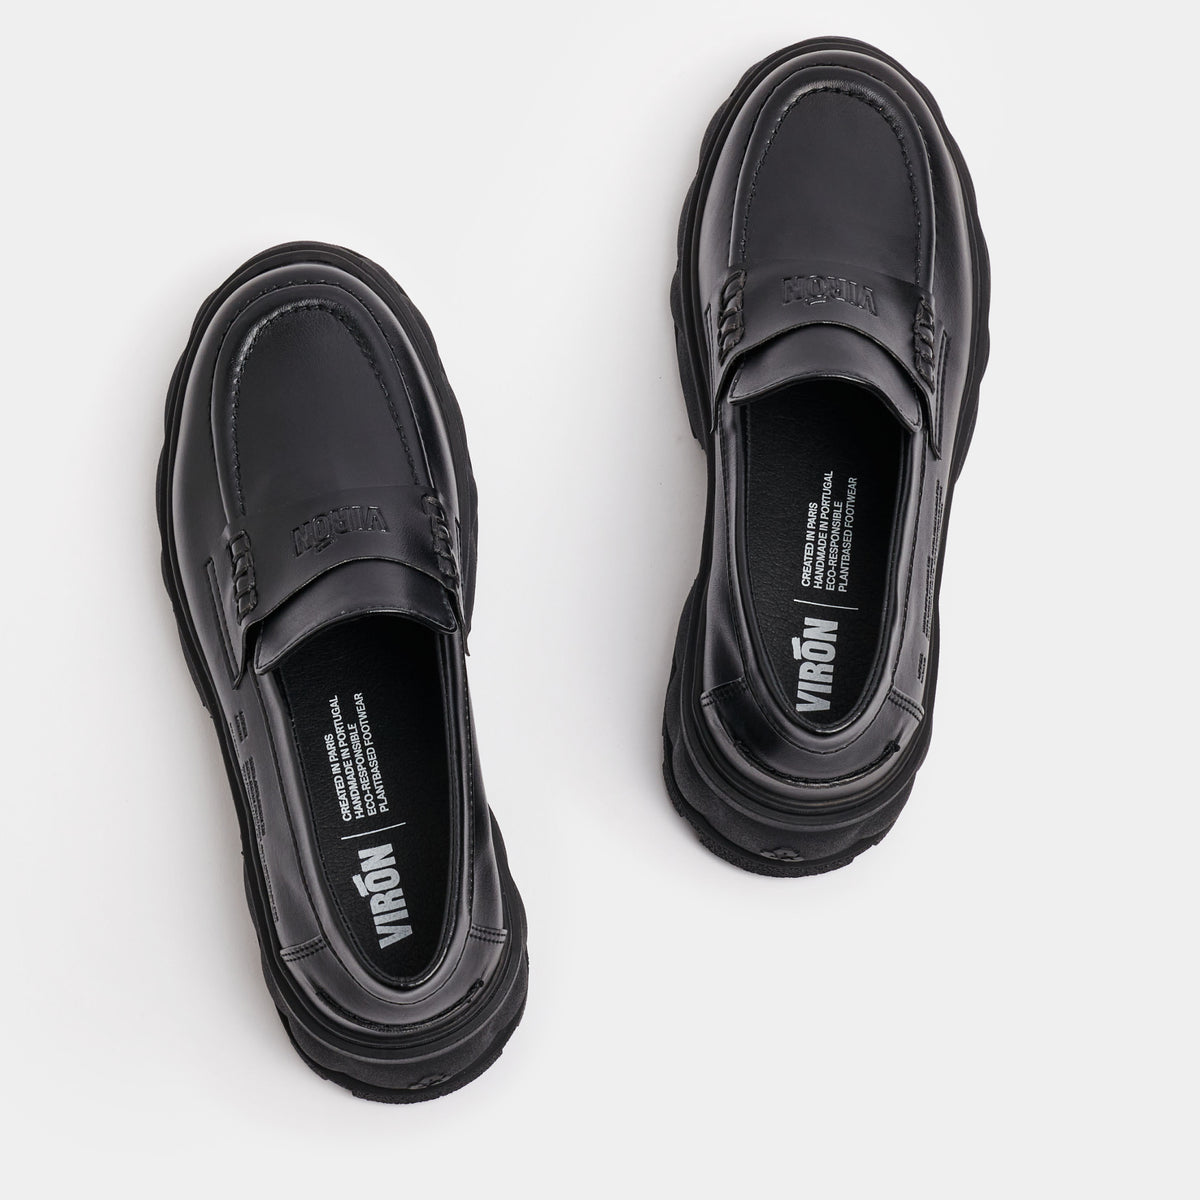 Quantum Vegan raised Loafer shoes out of Appleskin in Black Apple shown from the top